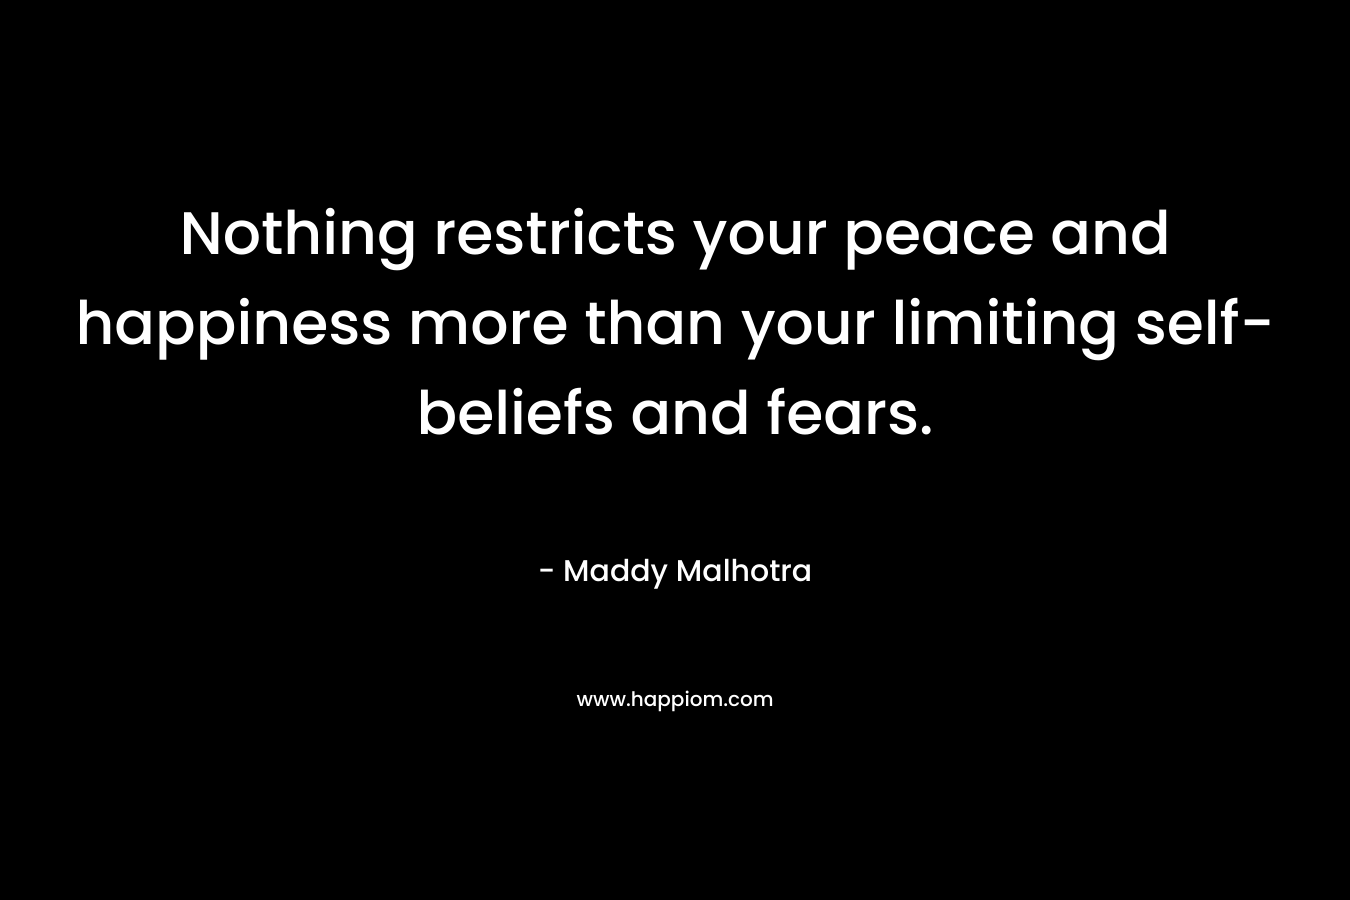 Nothing restricts your peace and happiness more than your limiting self-beliefs and fears. – Maddy Malhotra